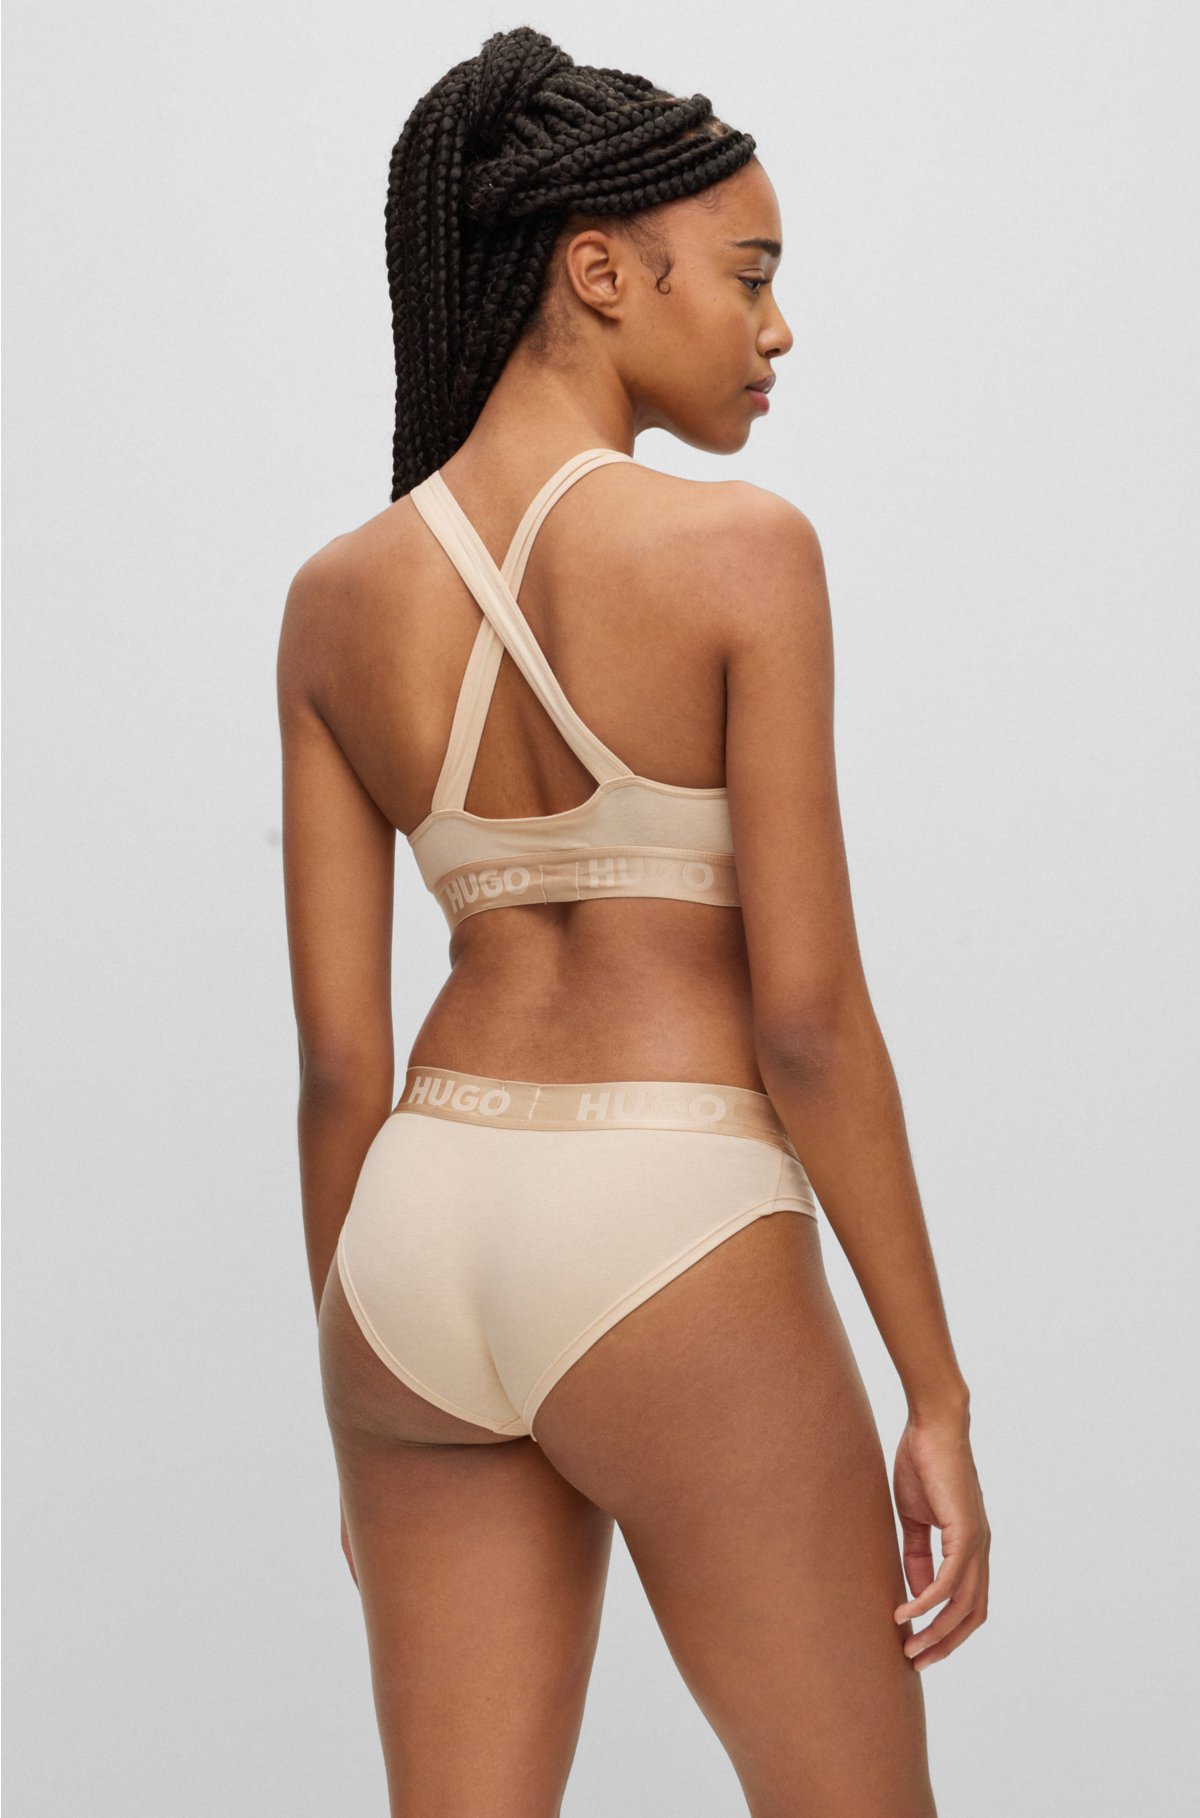 HUGO - Bralette in stretch repeat with cotton logos